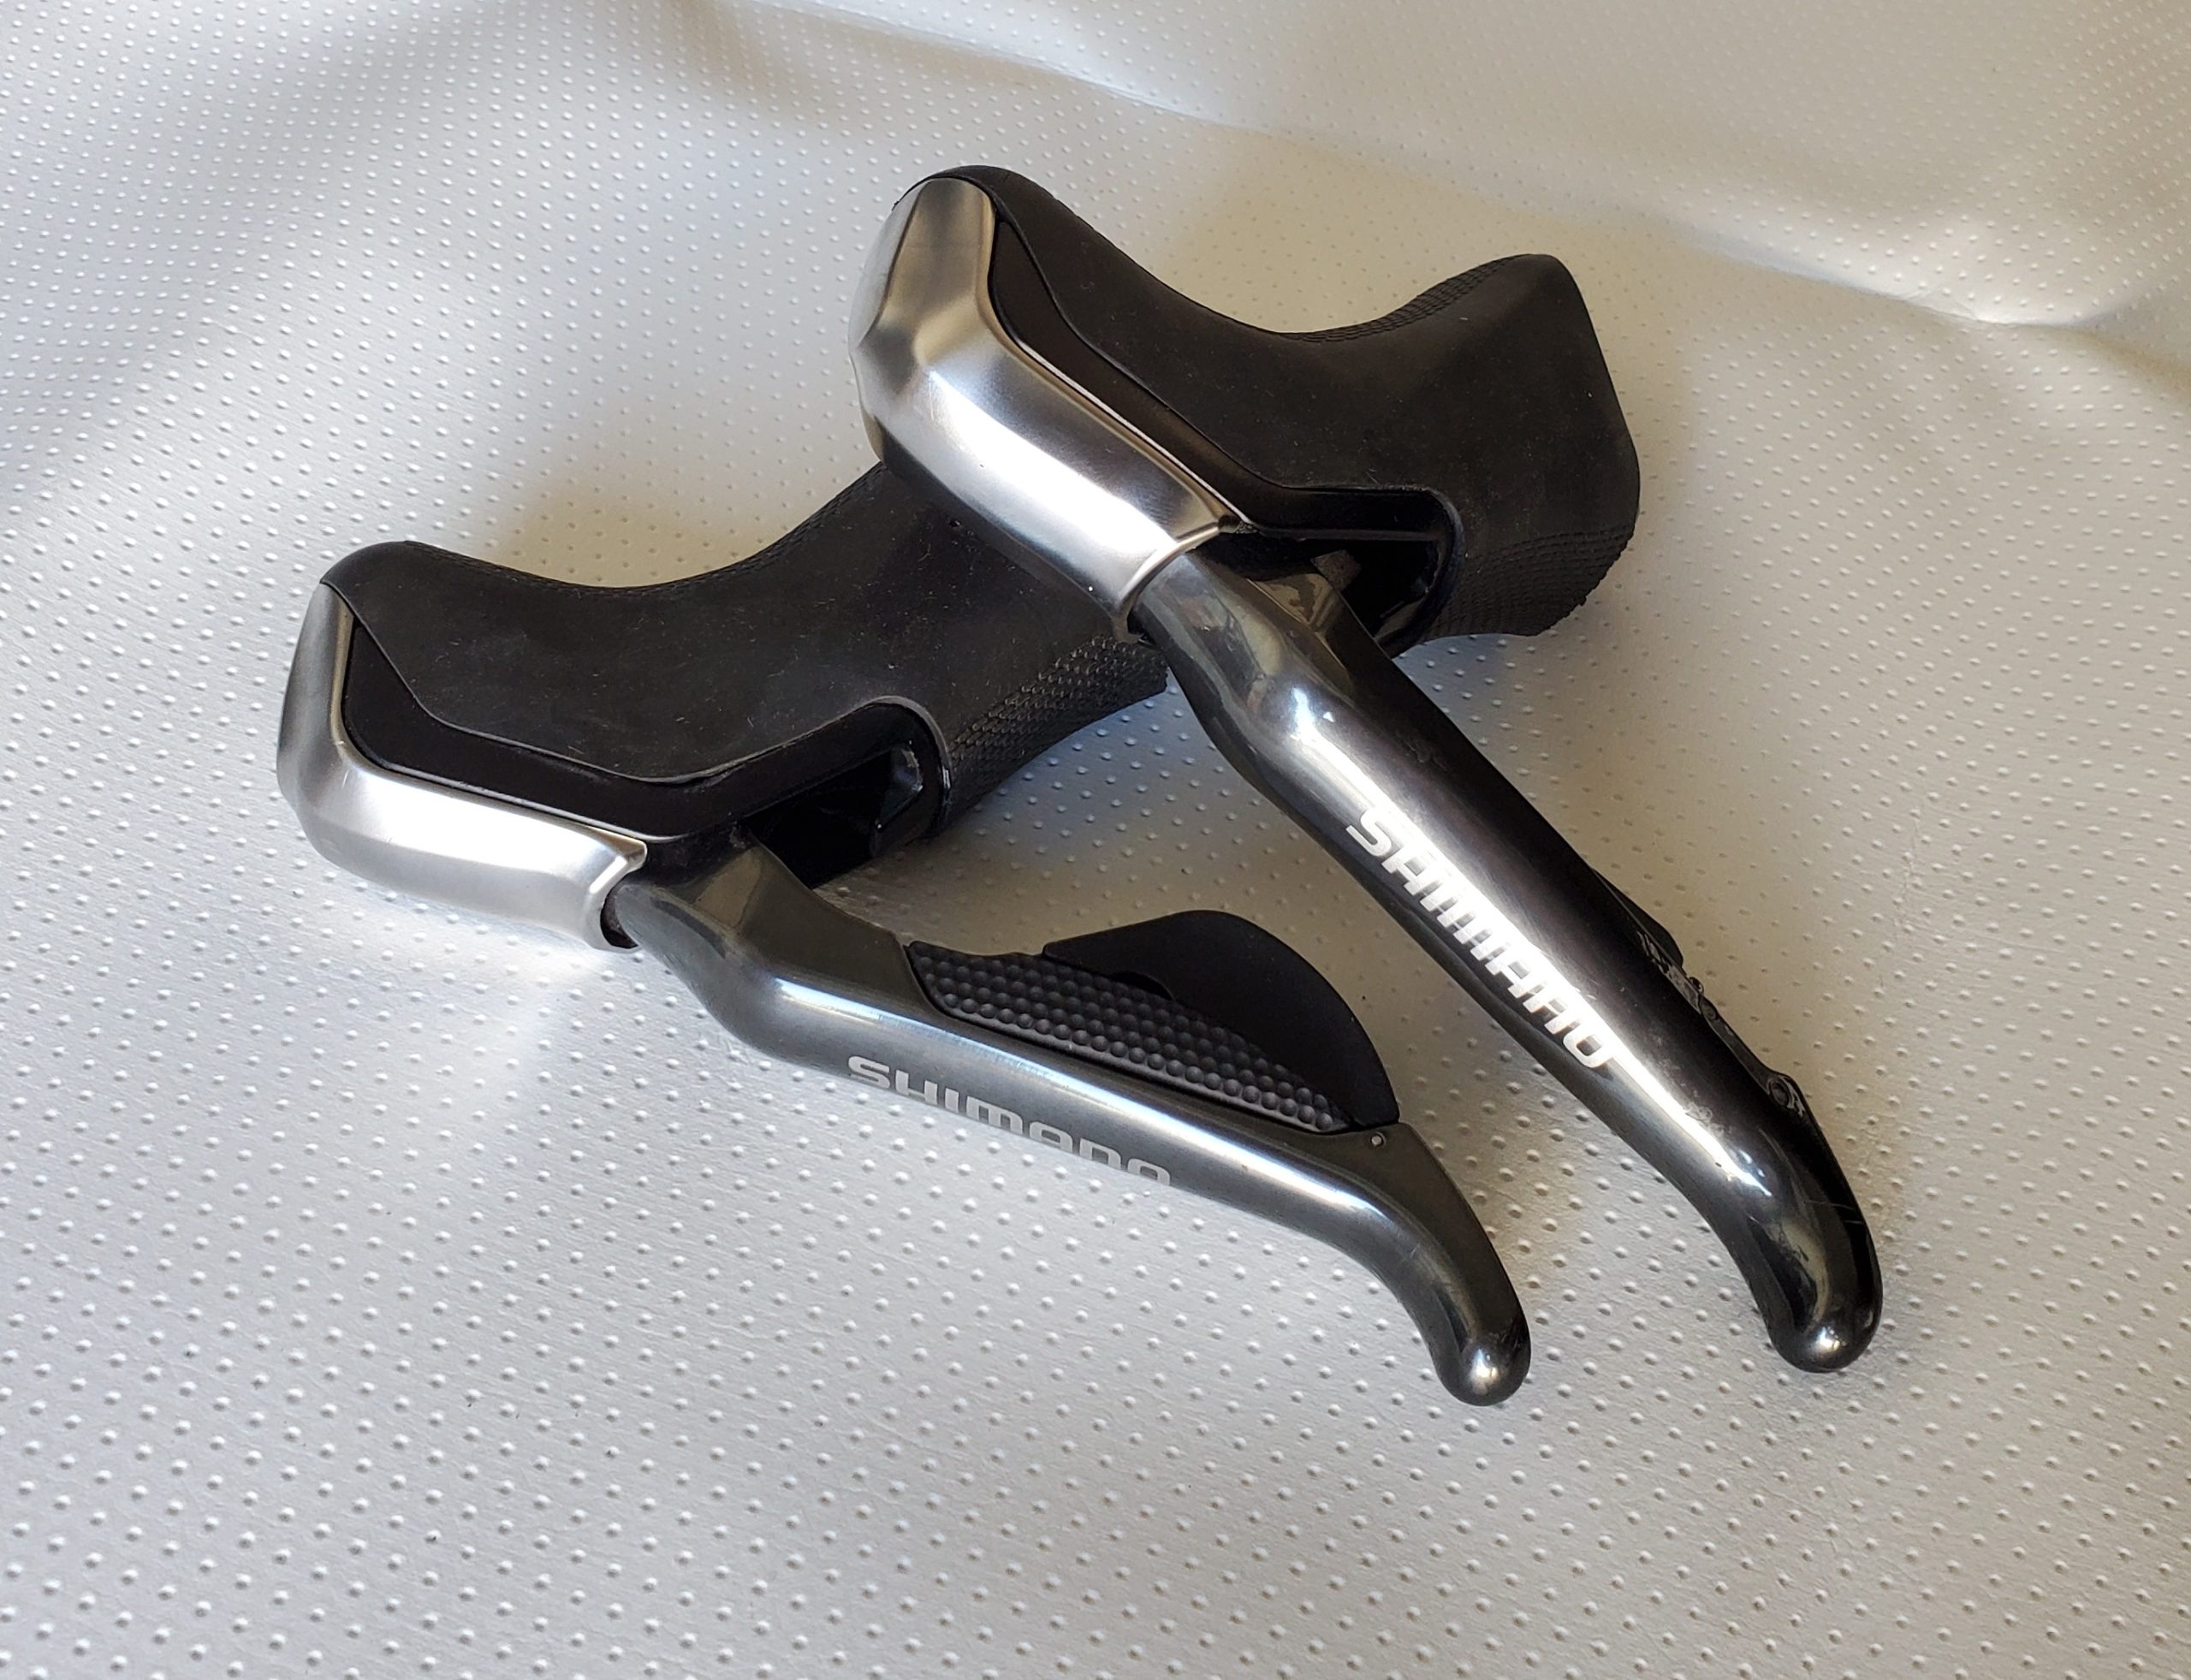 Shimano ST-R785 lever set (hydraulic, wired Di2)